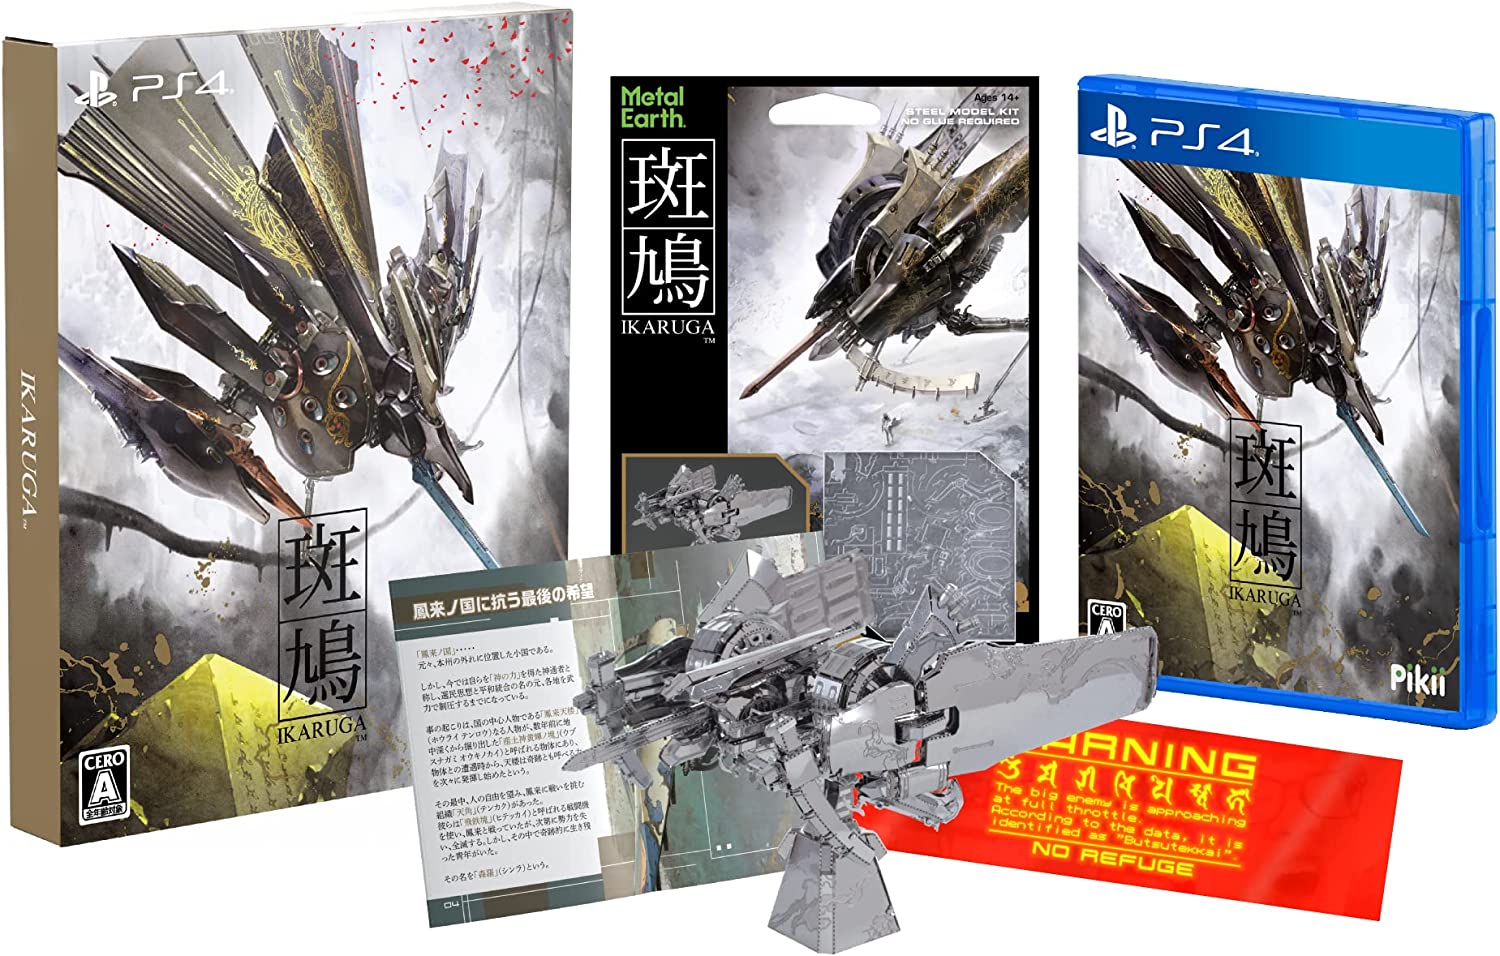 IKARUGA-PS4 LIMITED EDITION - REVERSIBLE COVER - SPECIAL BOX - FIGURE METAL EARTH "IKARUGA" - SPECIAL STICKER INCLUDED